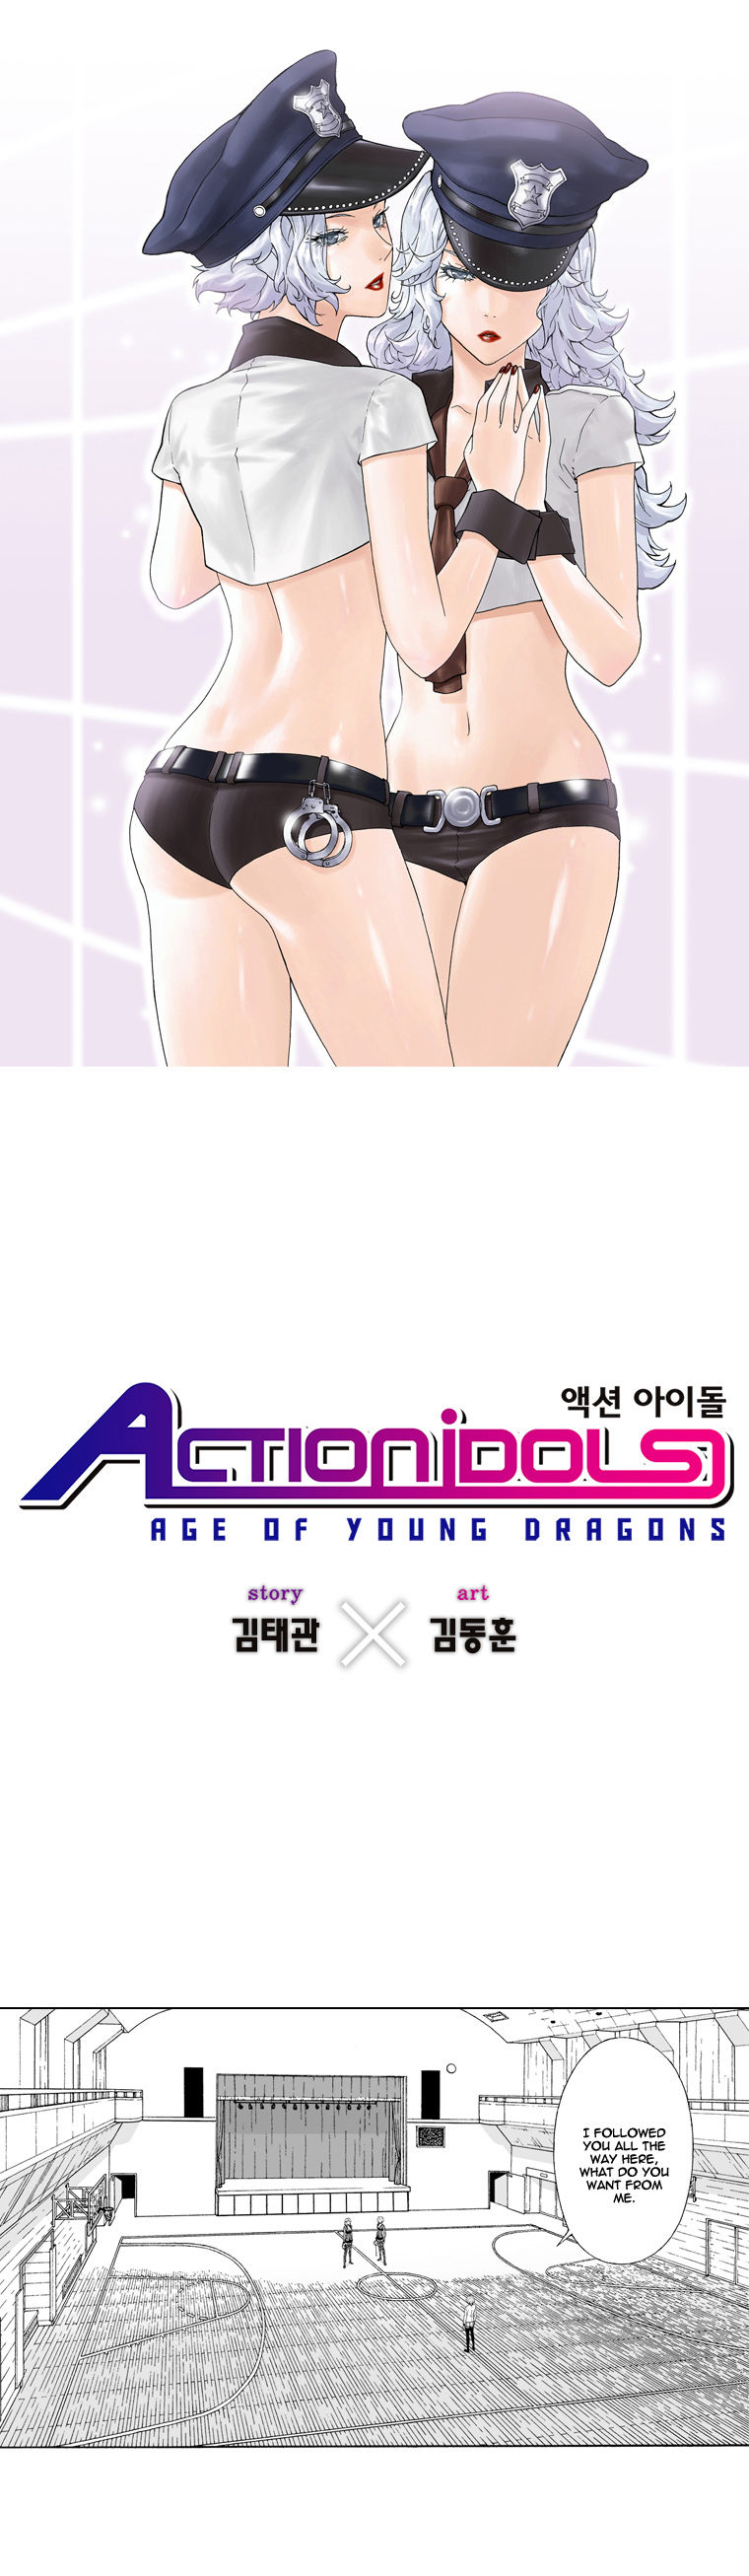 Action Idols - Age of Young Dragons 3